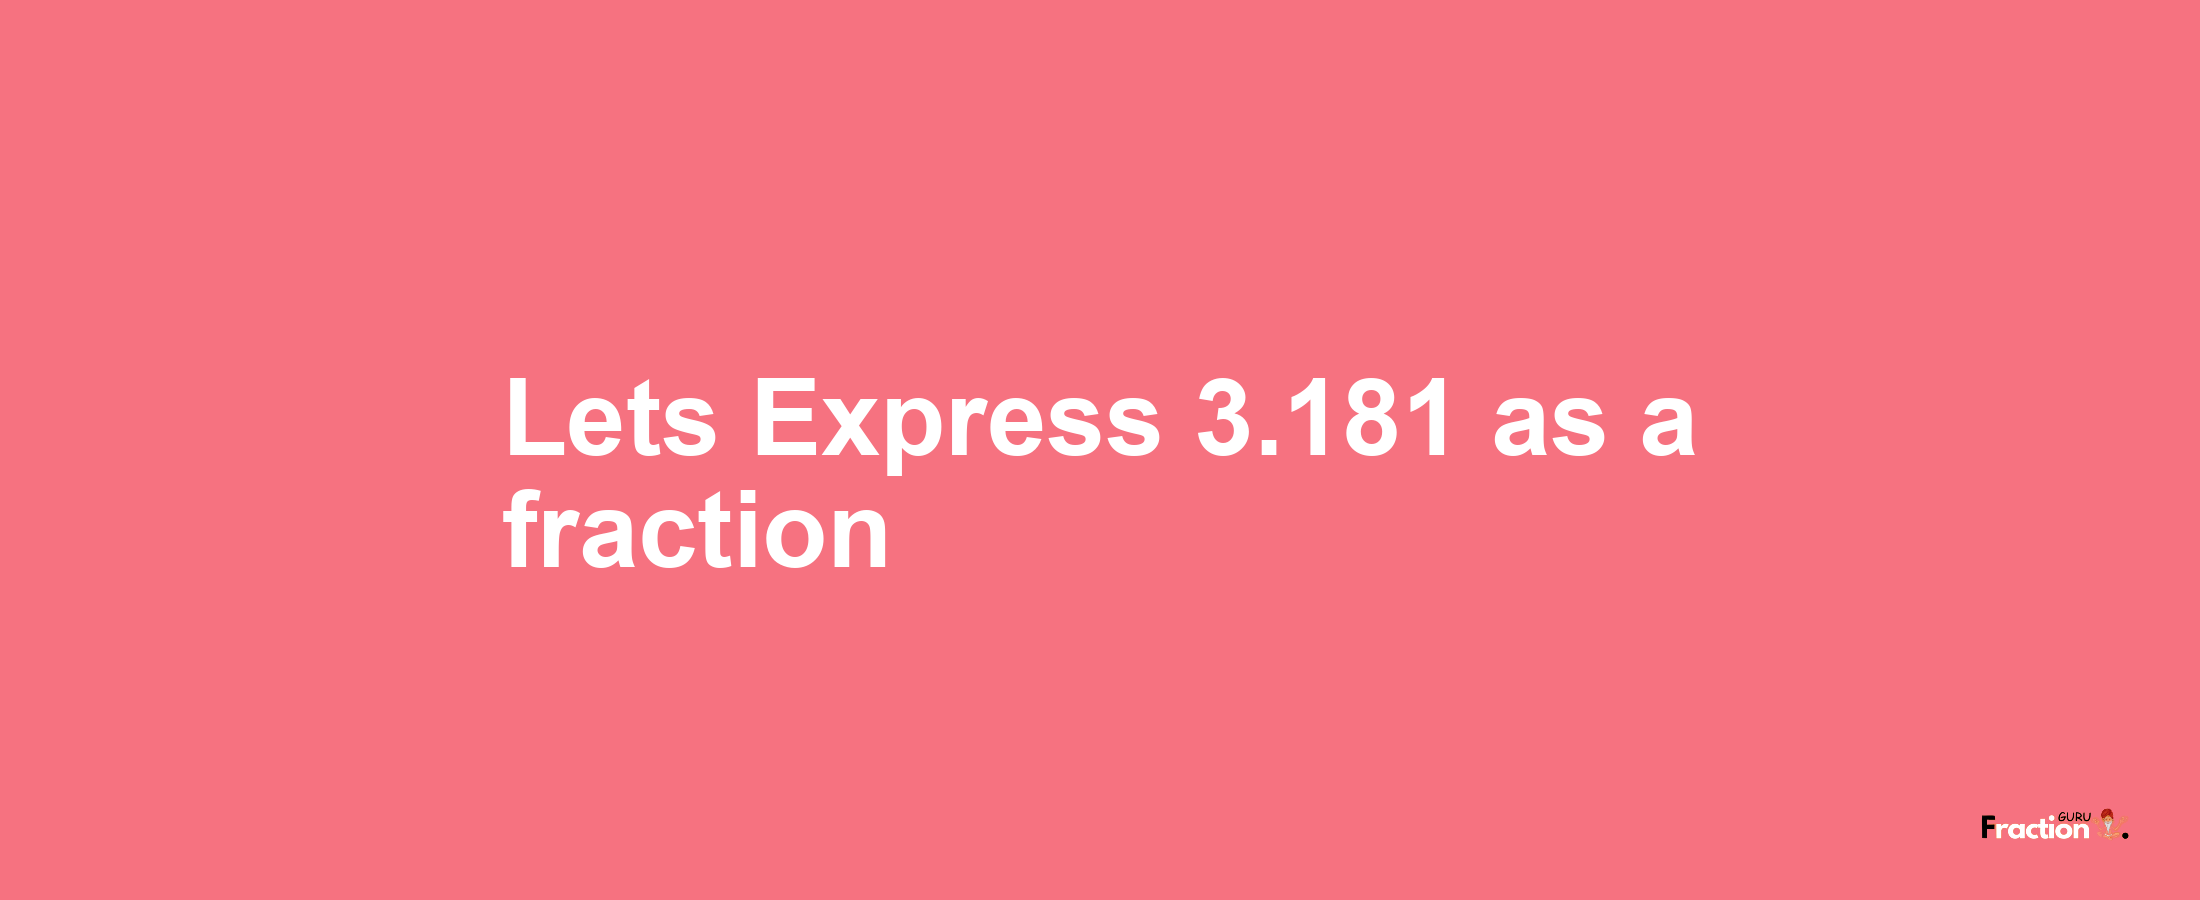 Lets Express 3.181 as afraction